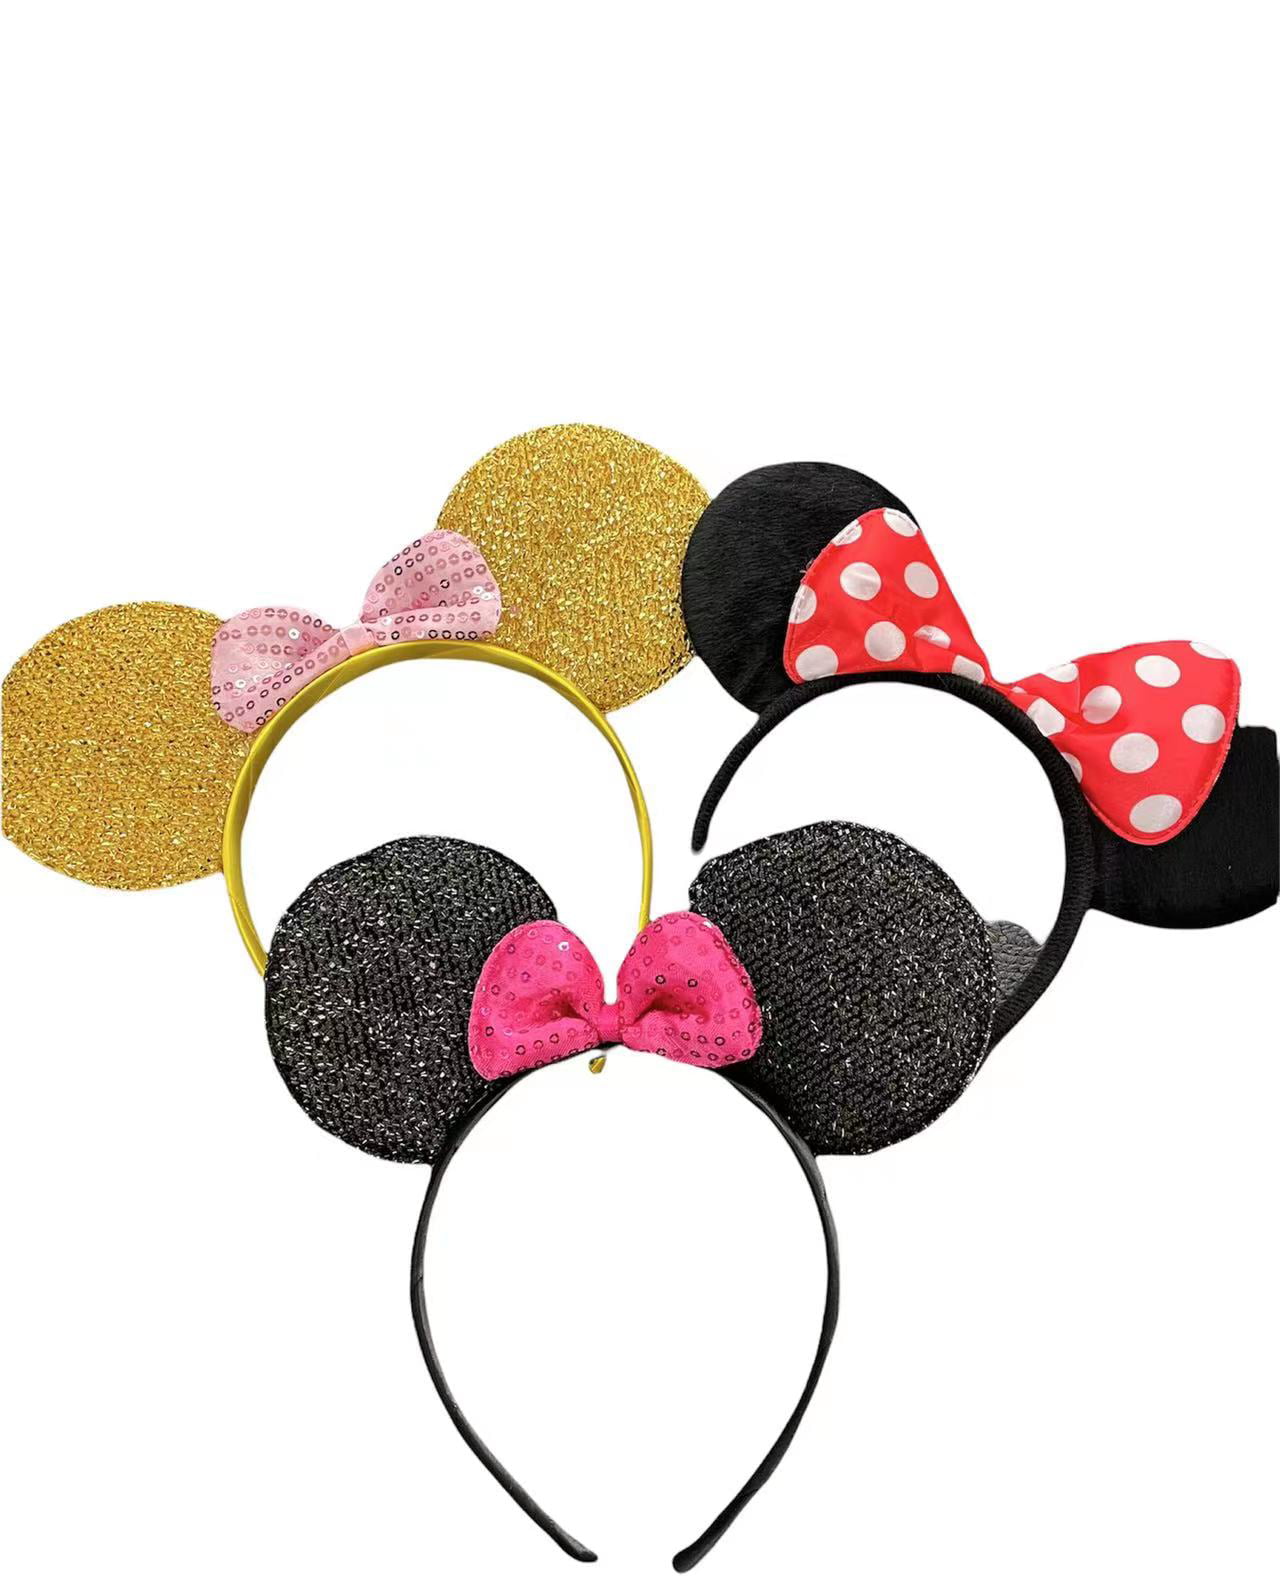 1 PC POLKADOT MICKEY MOUSE RED BOW EARS HEADBAND FITS MOST CHILDREN AND ADULTS